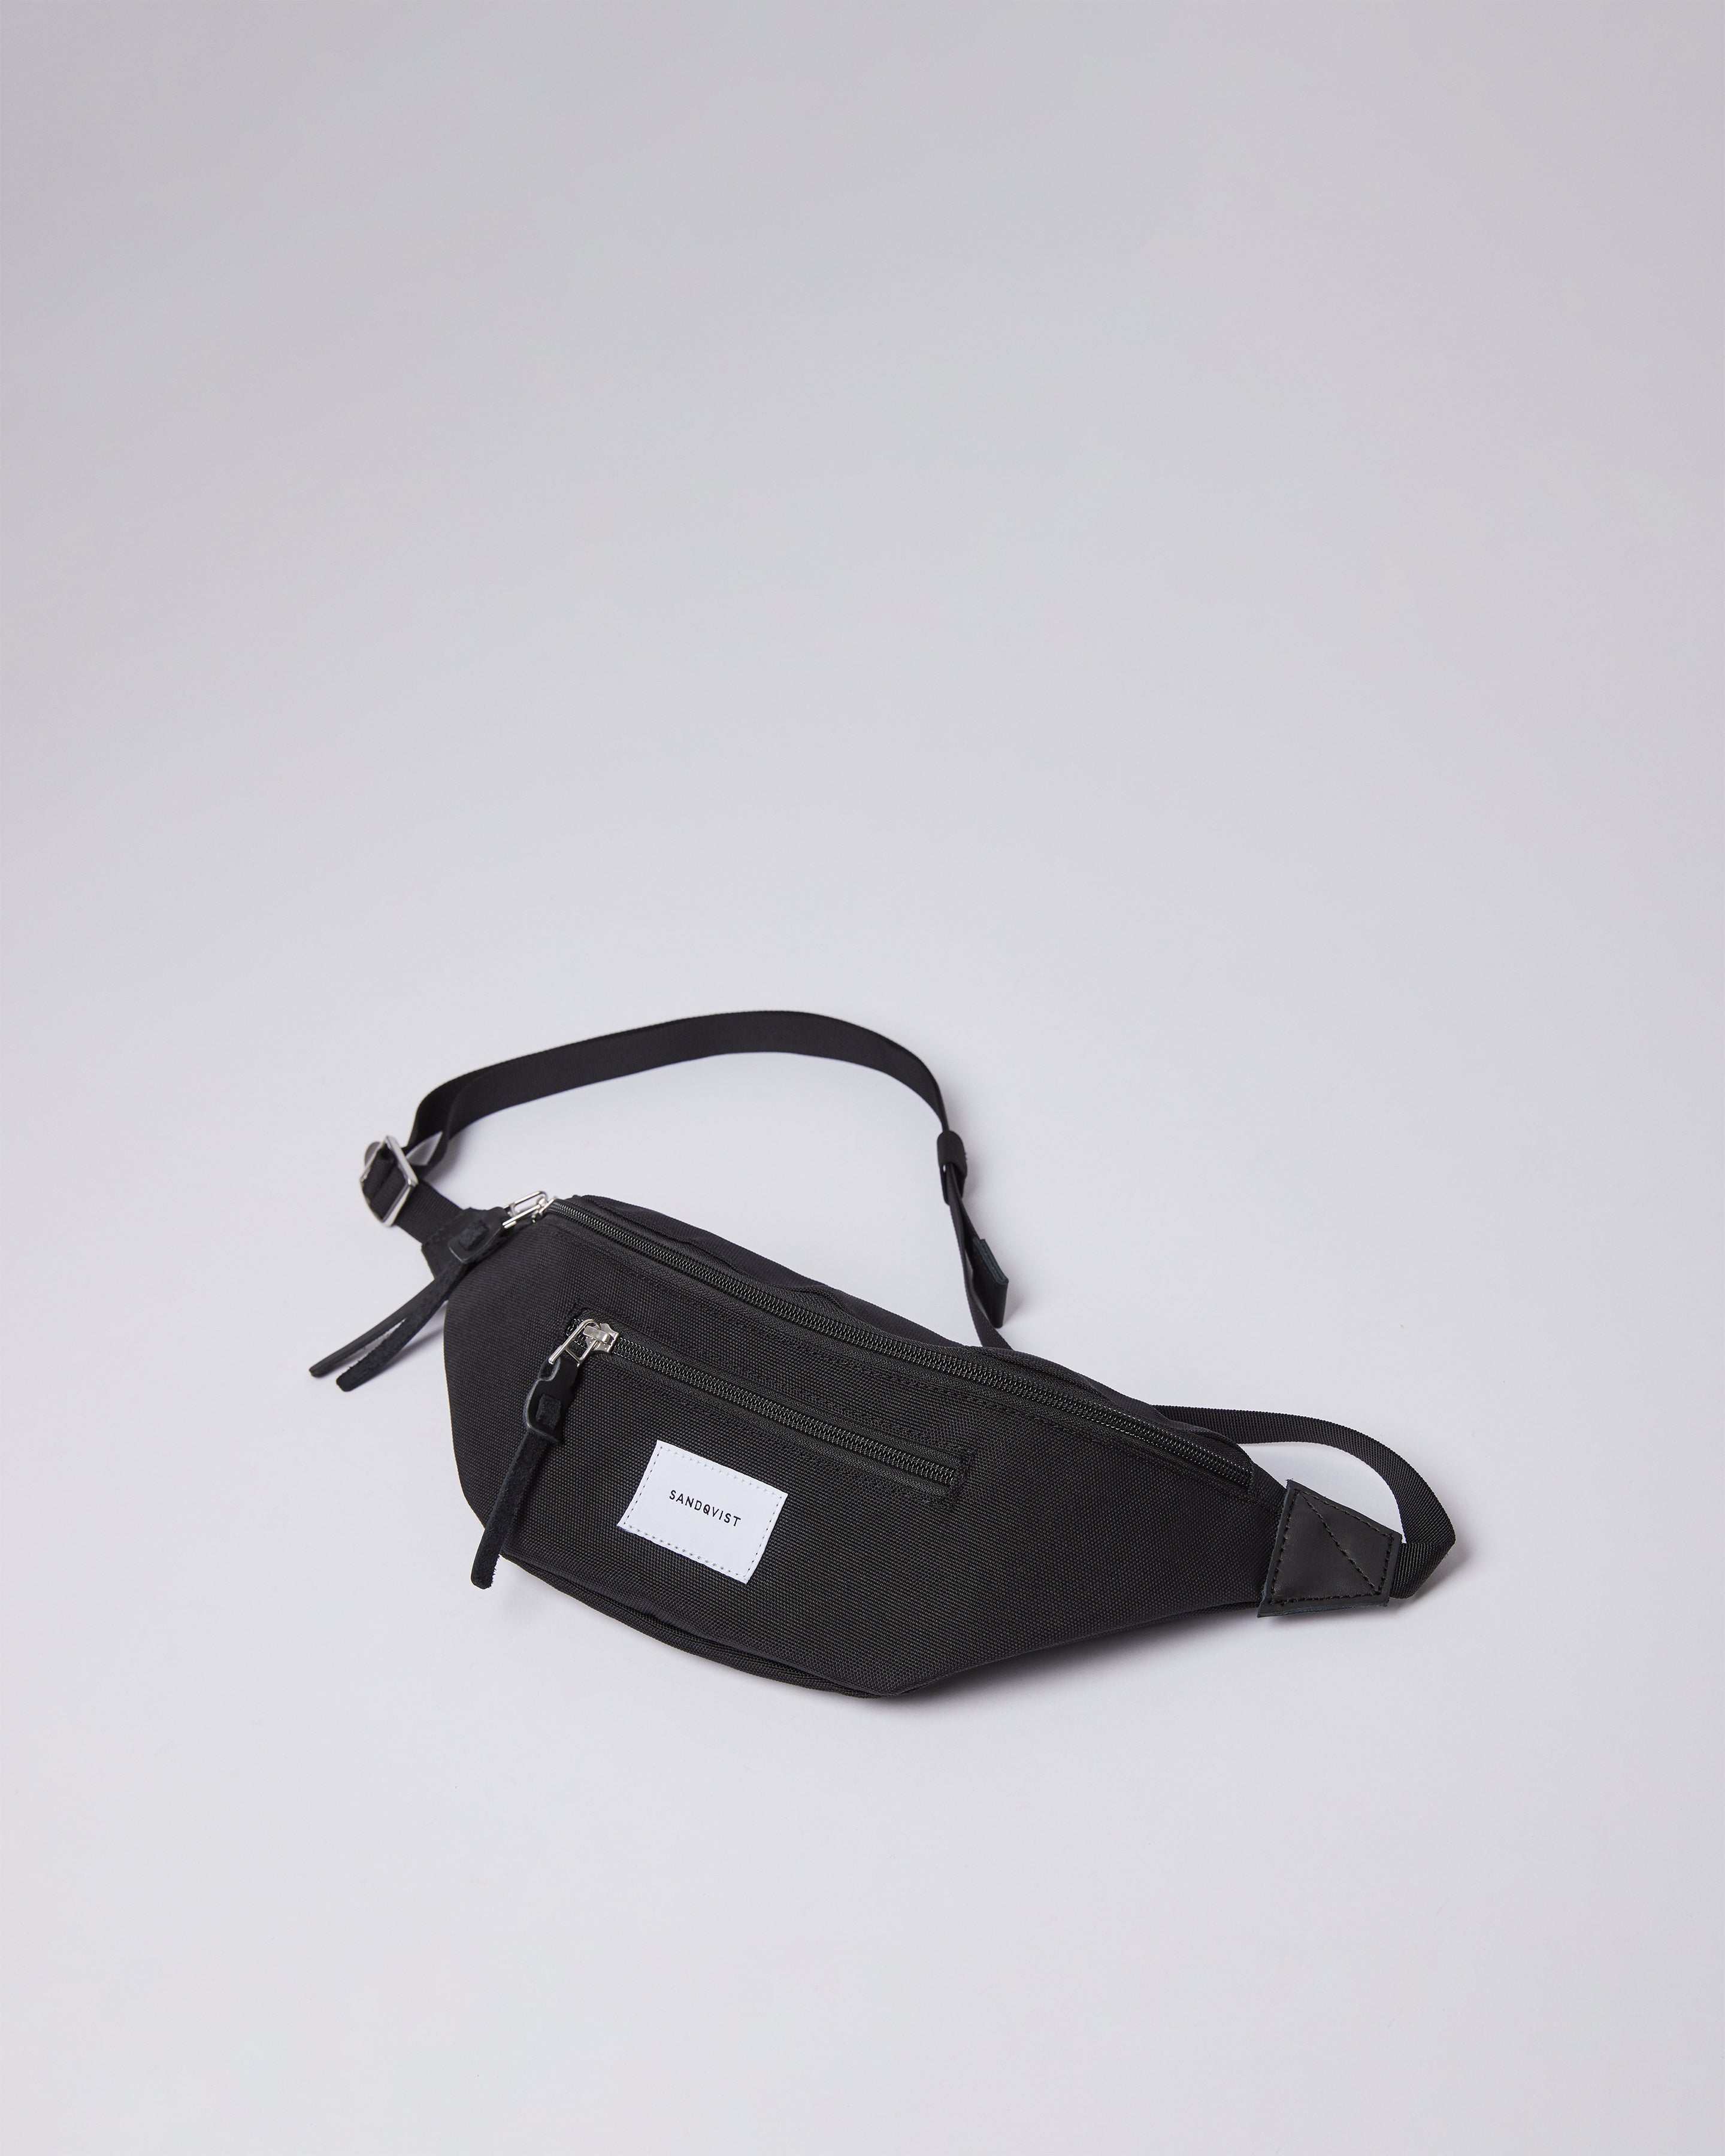 Sandqvist Aste Crossbody Bag in Black SQA1036 | Shop from eightywingold an official brand partner for Sandqvist Canada and US.